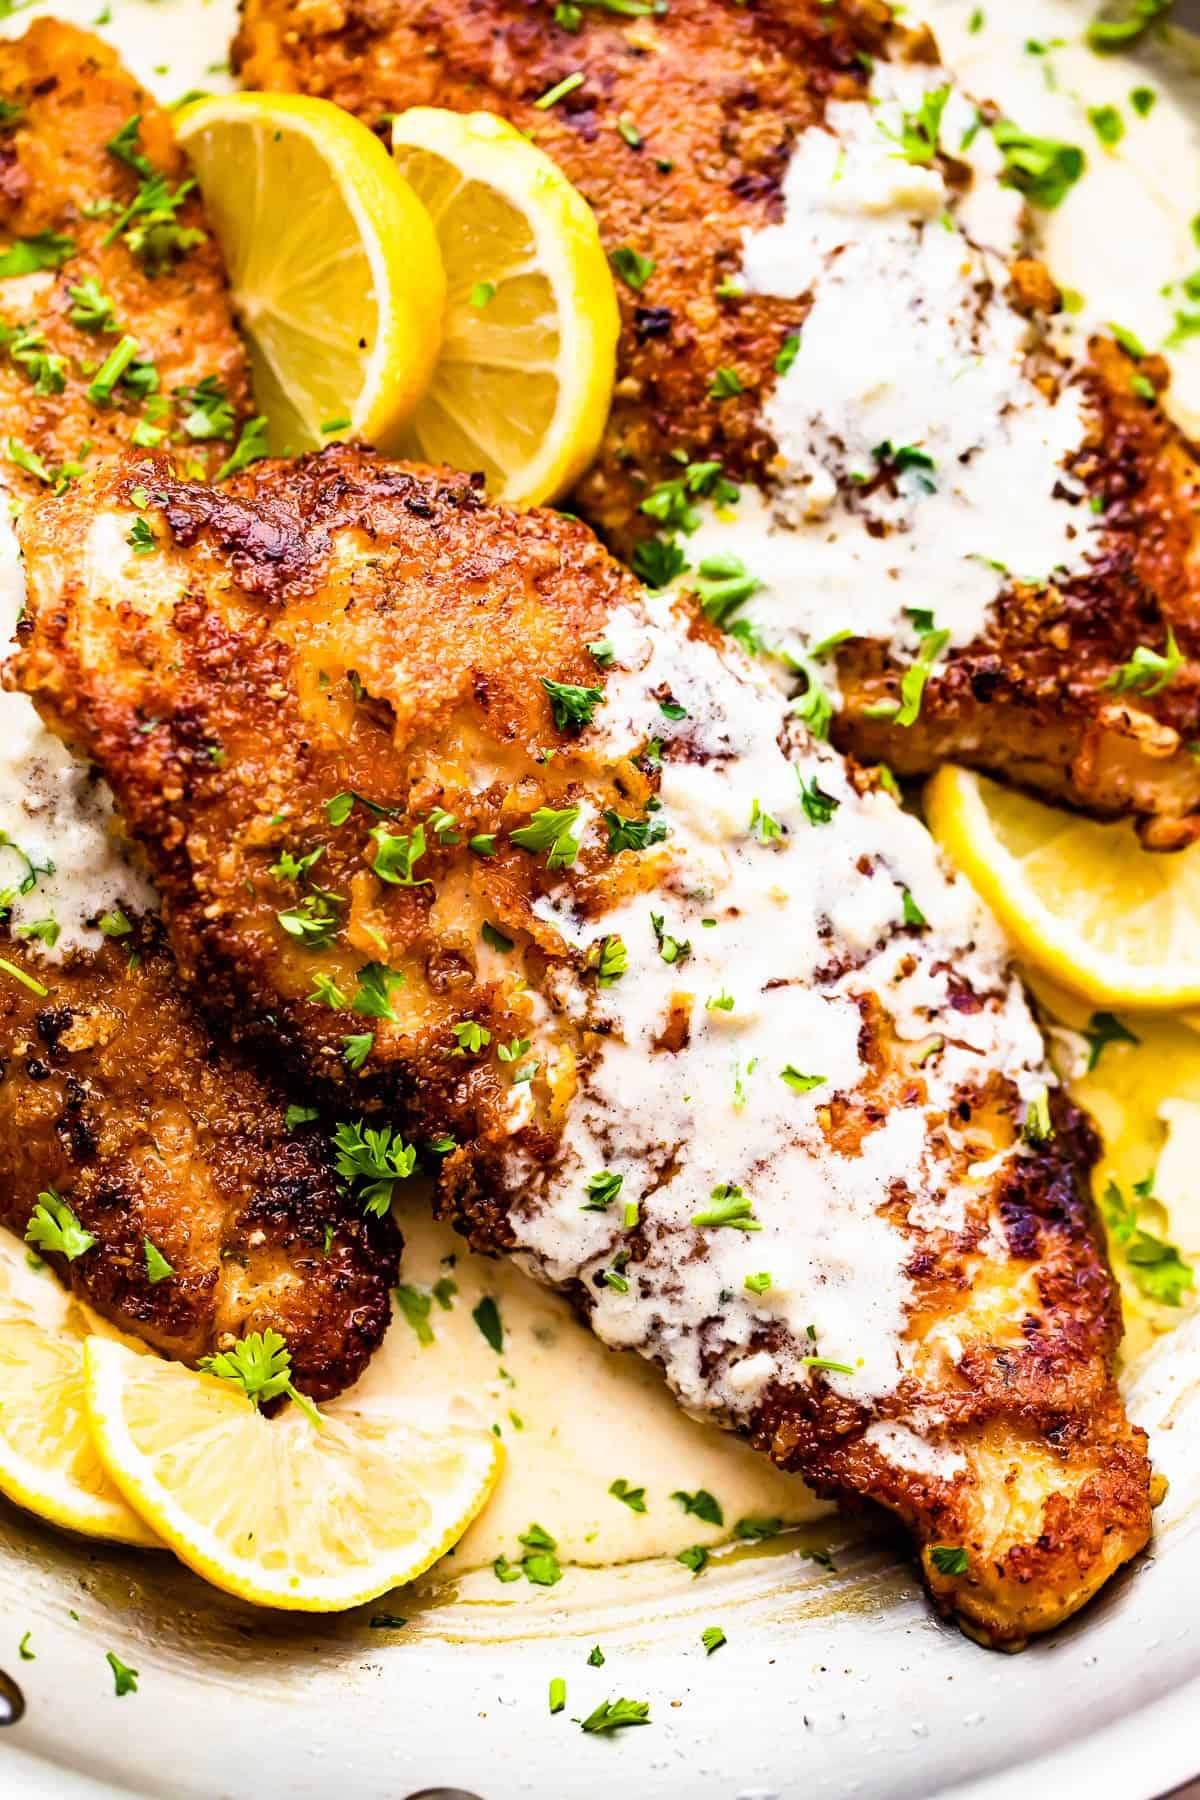 three breaded turkey cutlets topped with creamy lemon sauce and garnished with lemon slices and parsley